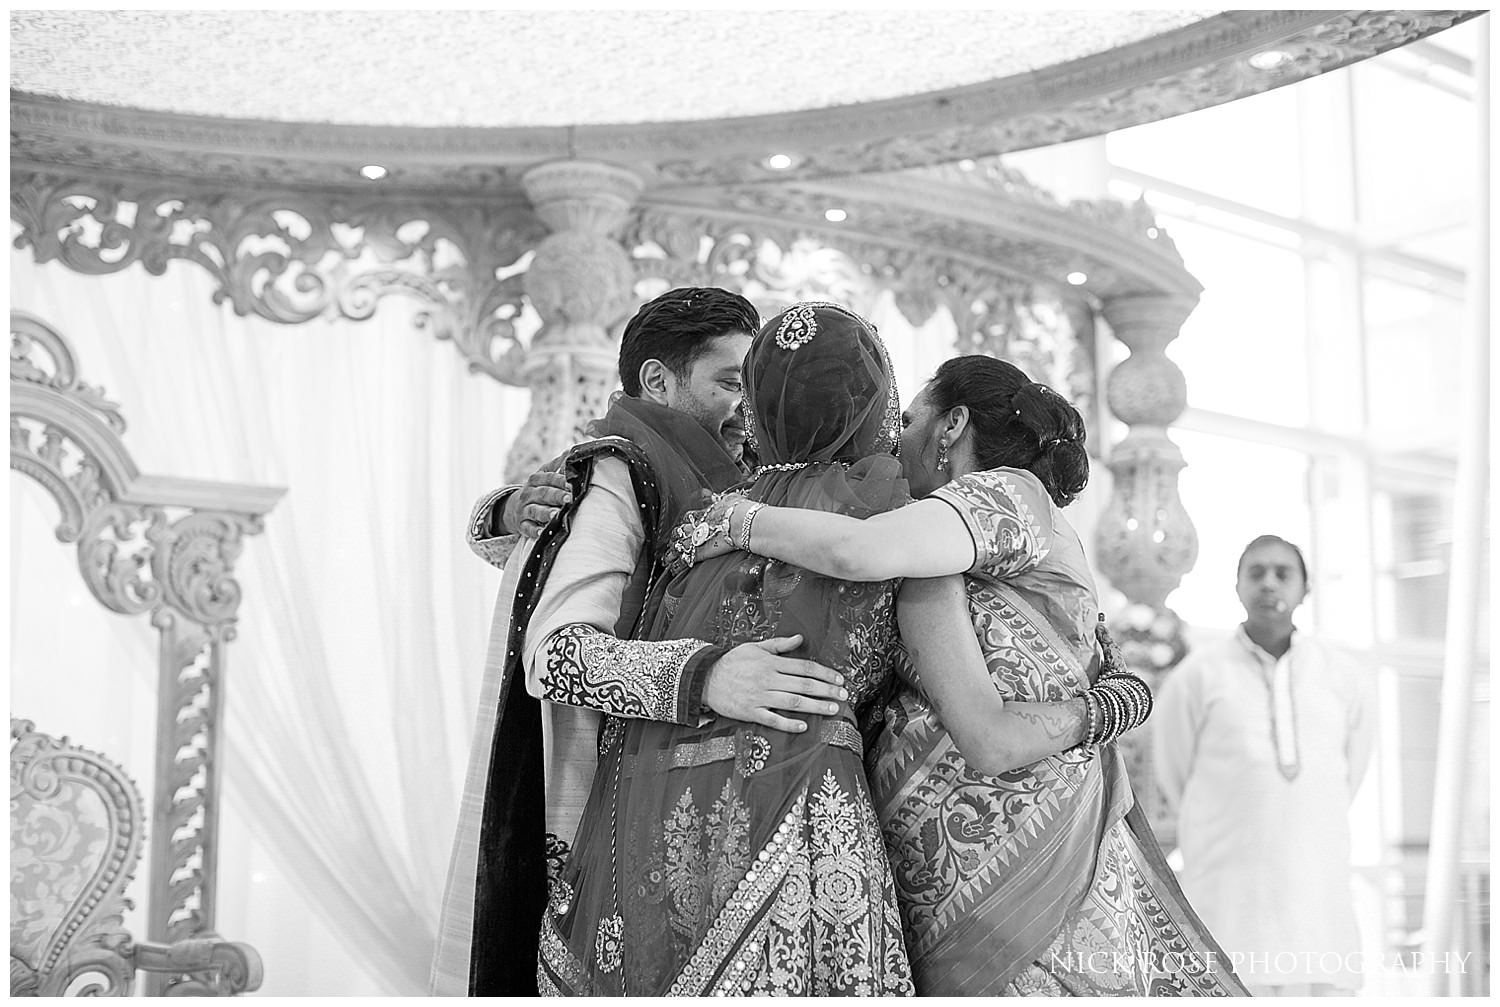  Family hugging during an Asian Hindu wedding in the East Wintergarden at Canary Wharf London 